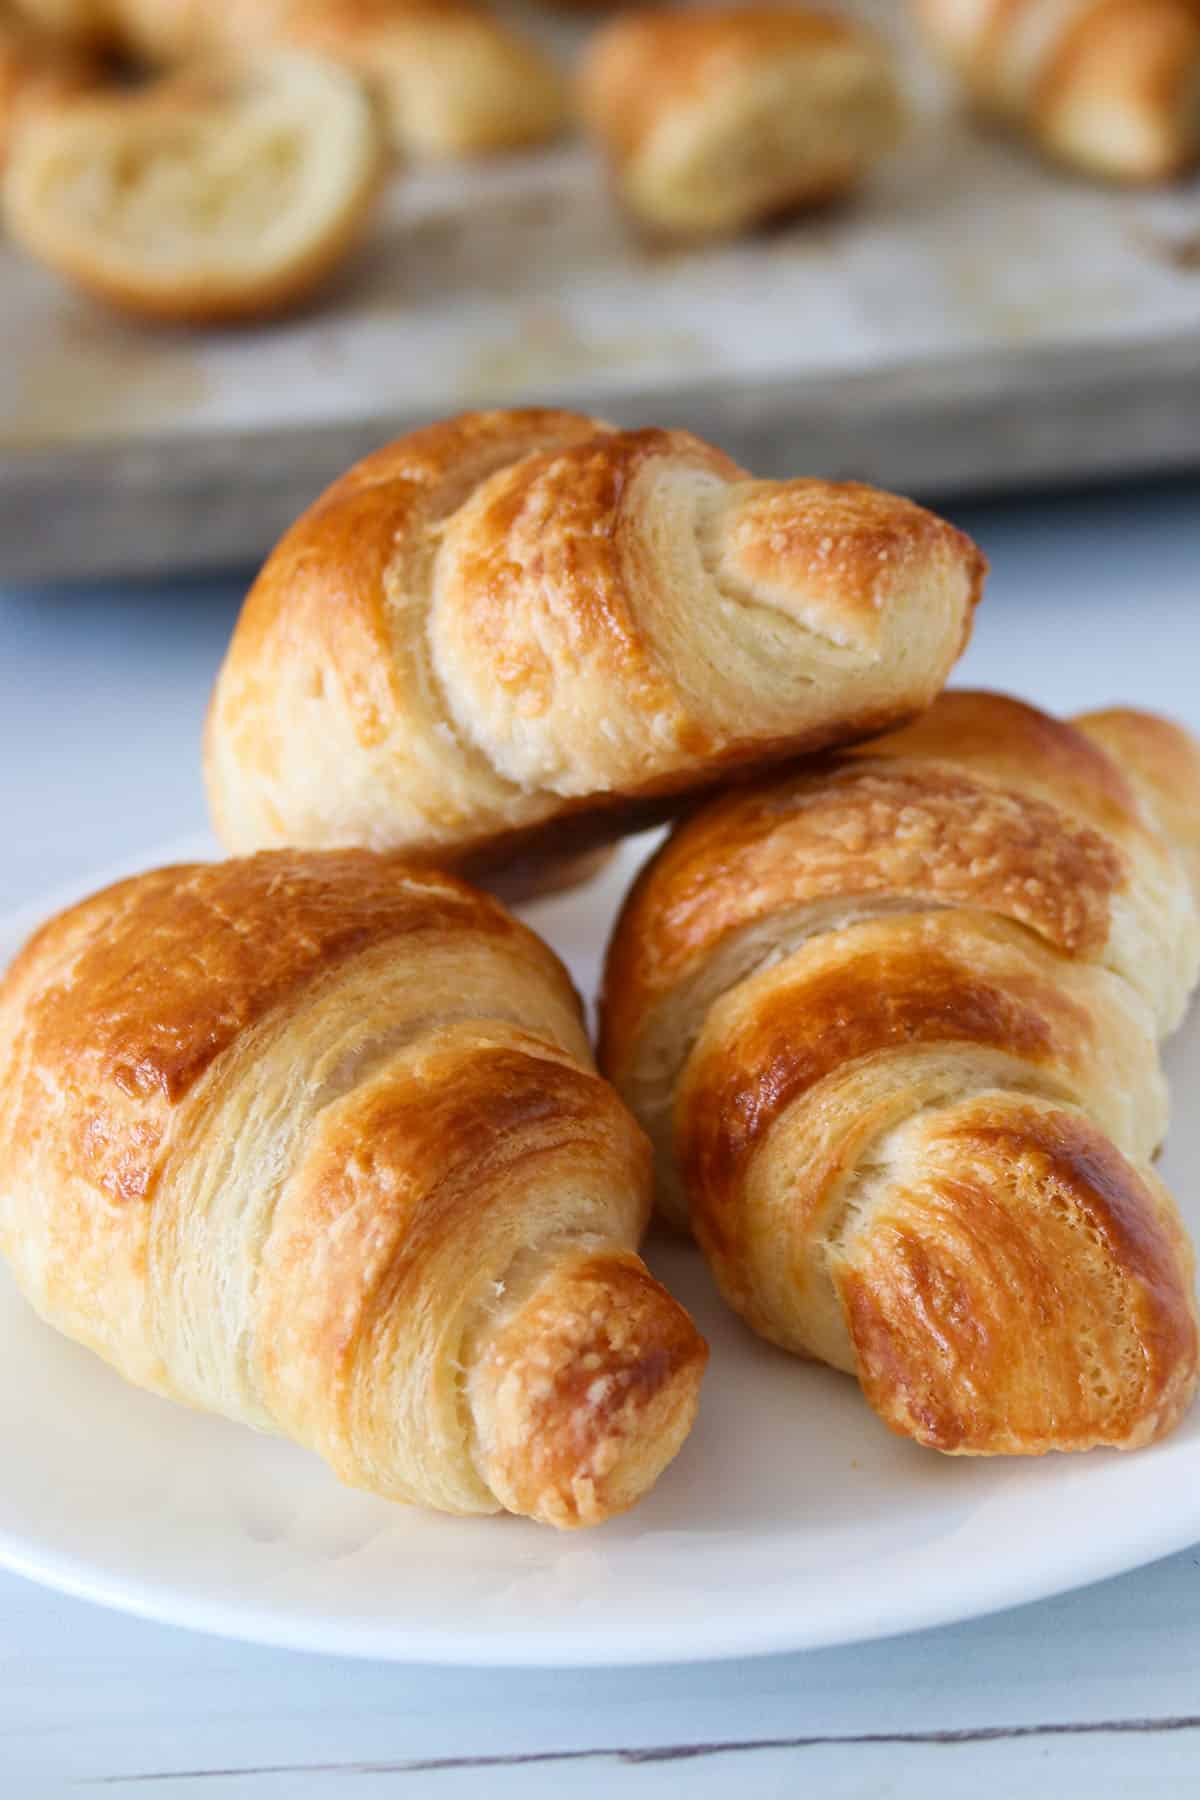 Three Croissants in a plate.